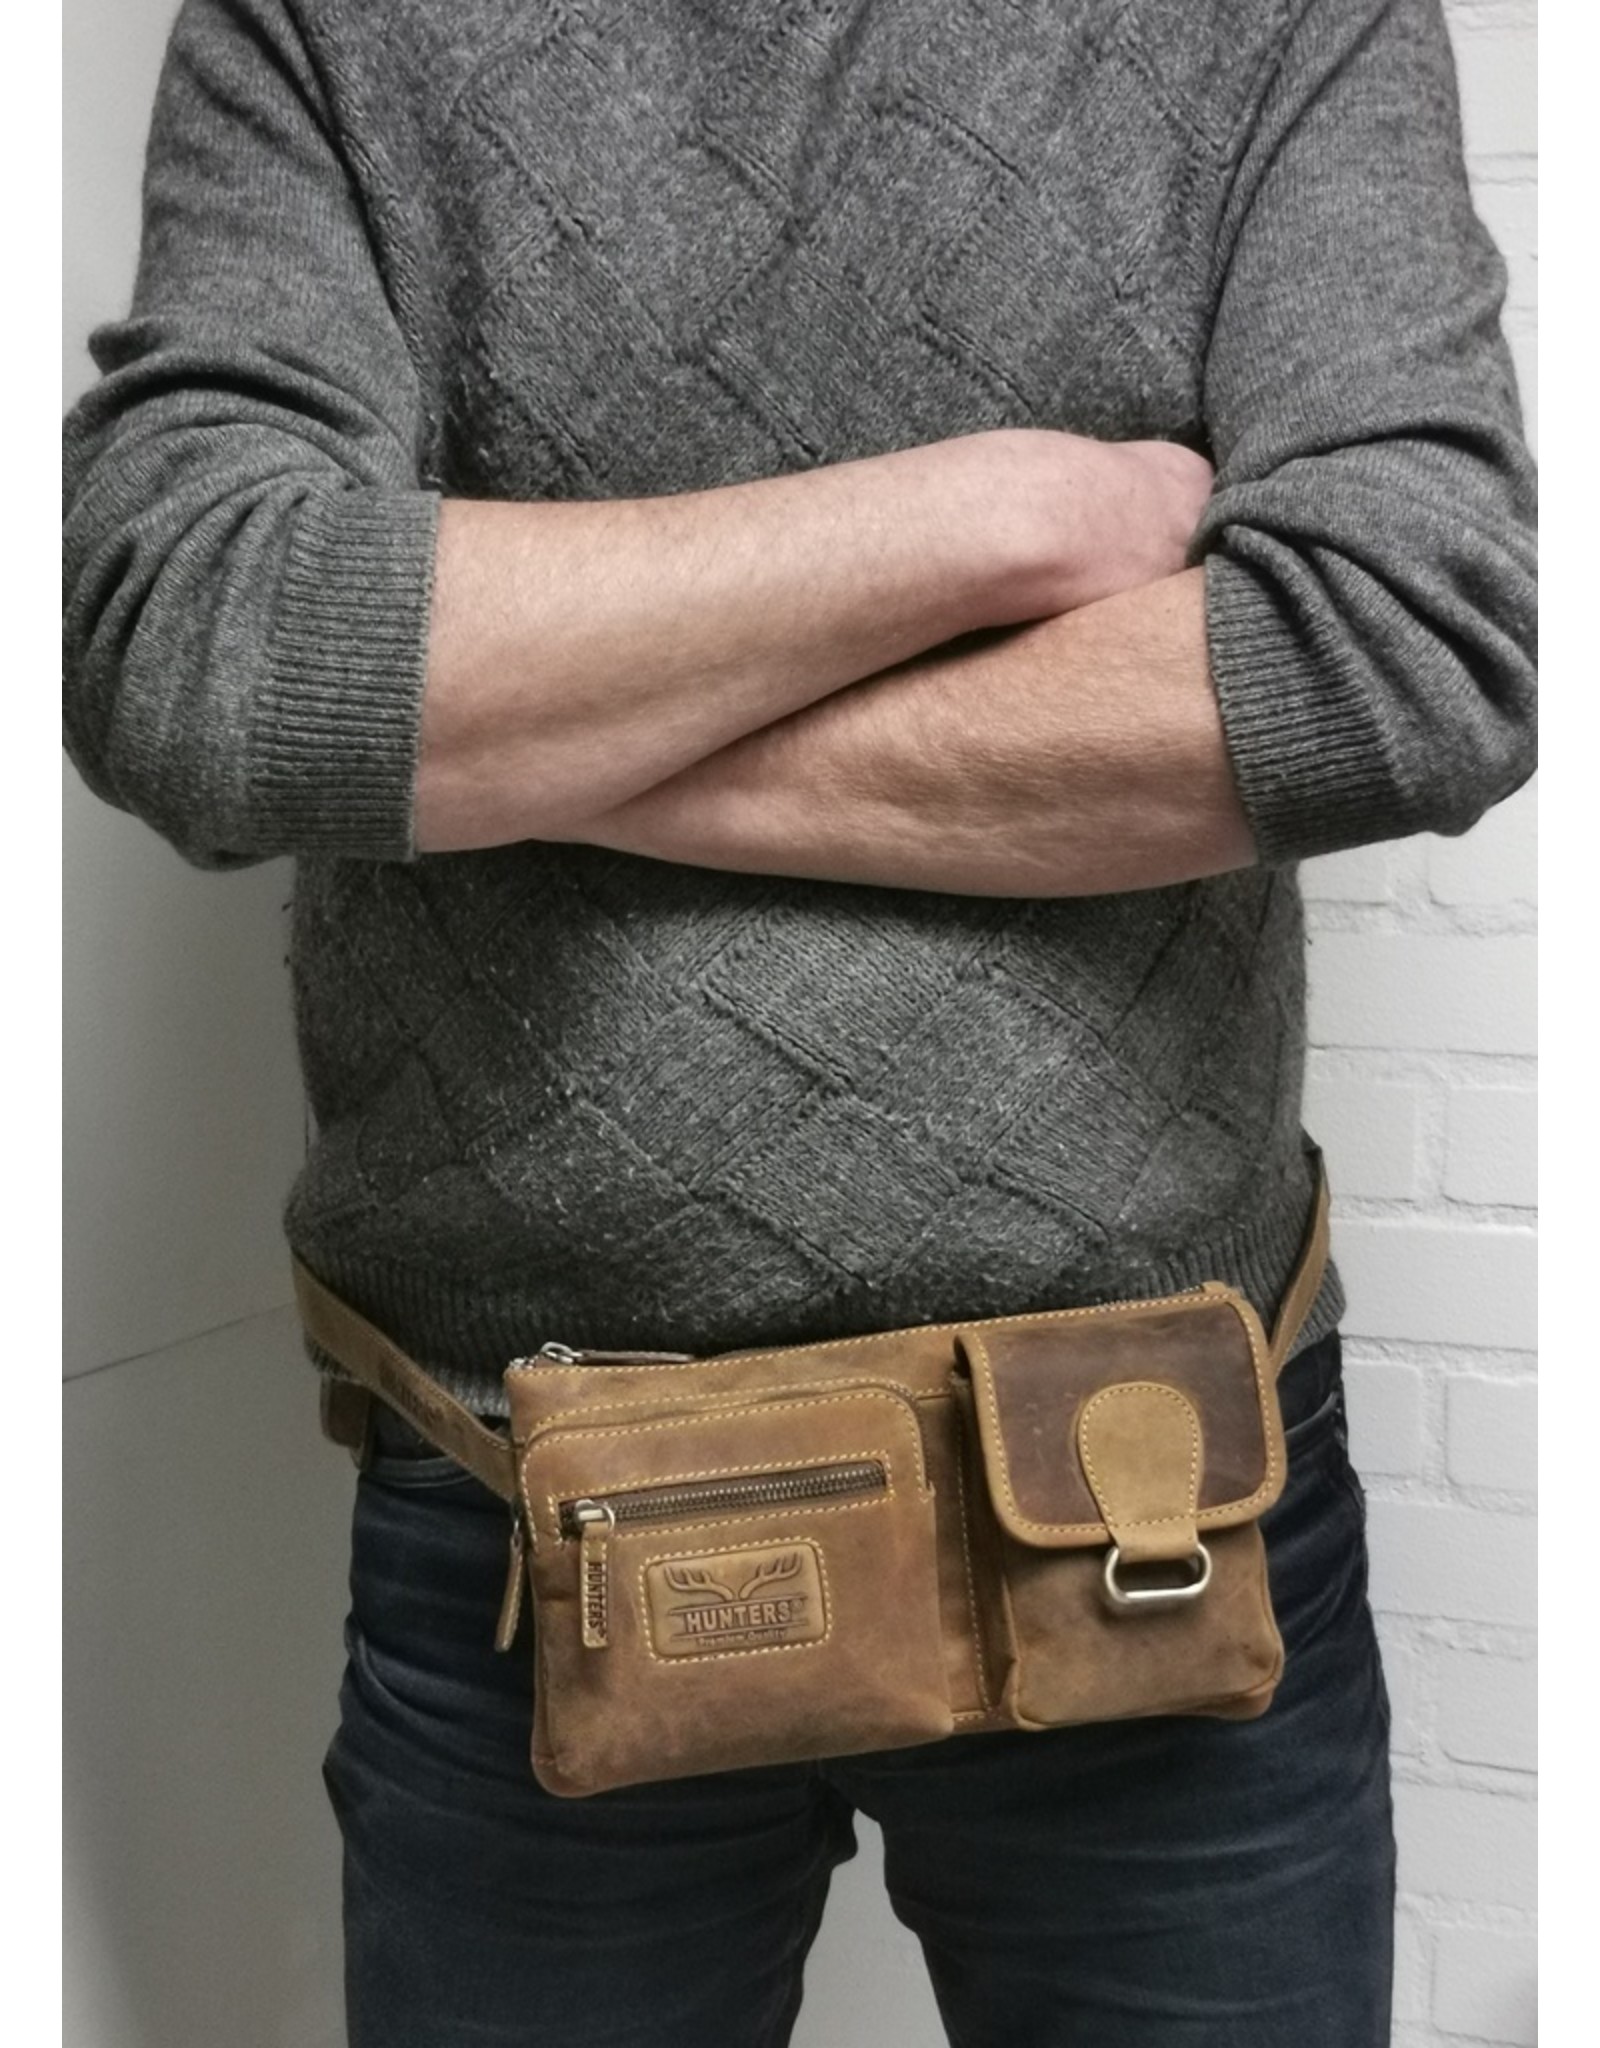 Hunters Leather Festival bags, waist bags and belt bags - Hunters Waist bag - Crossbody bag Buffalo Leather